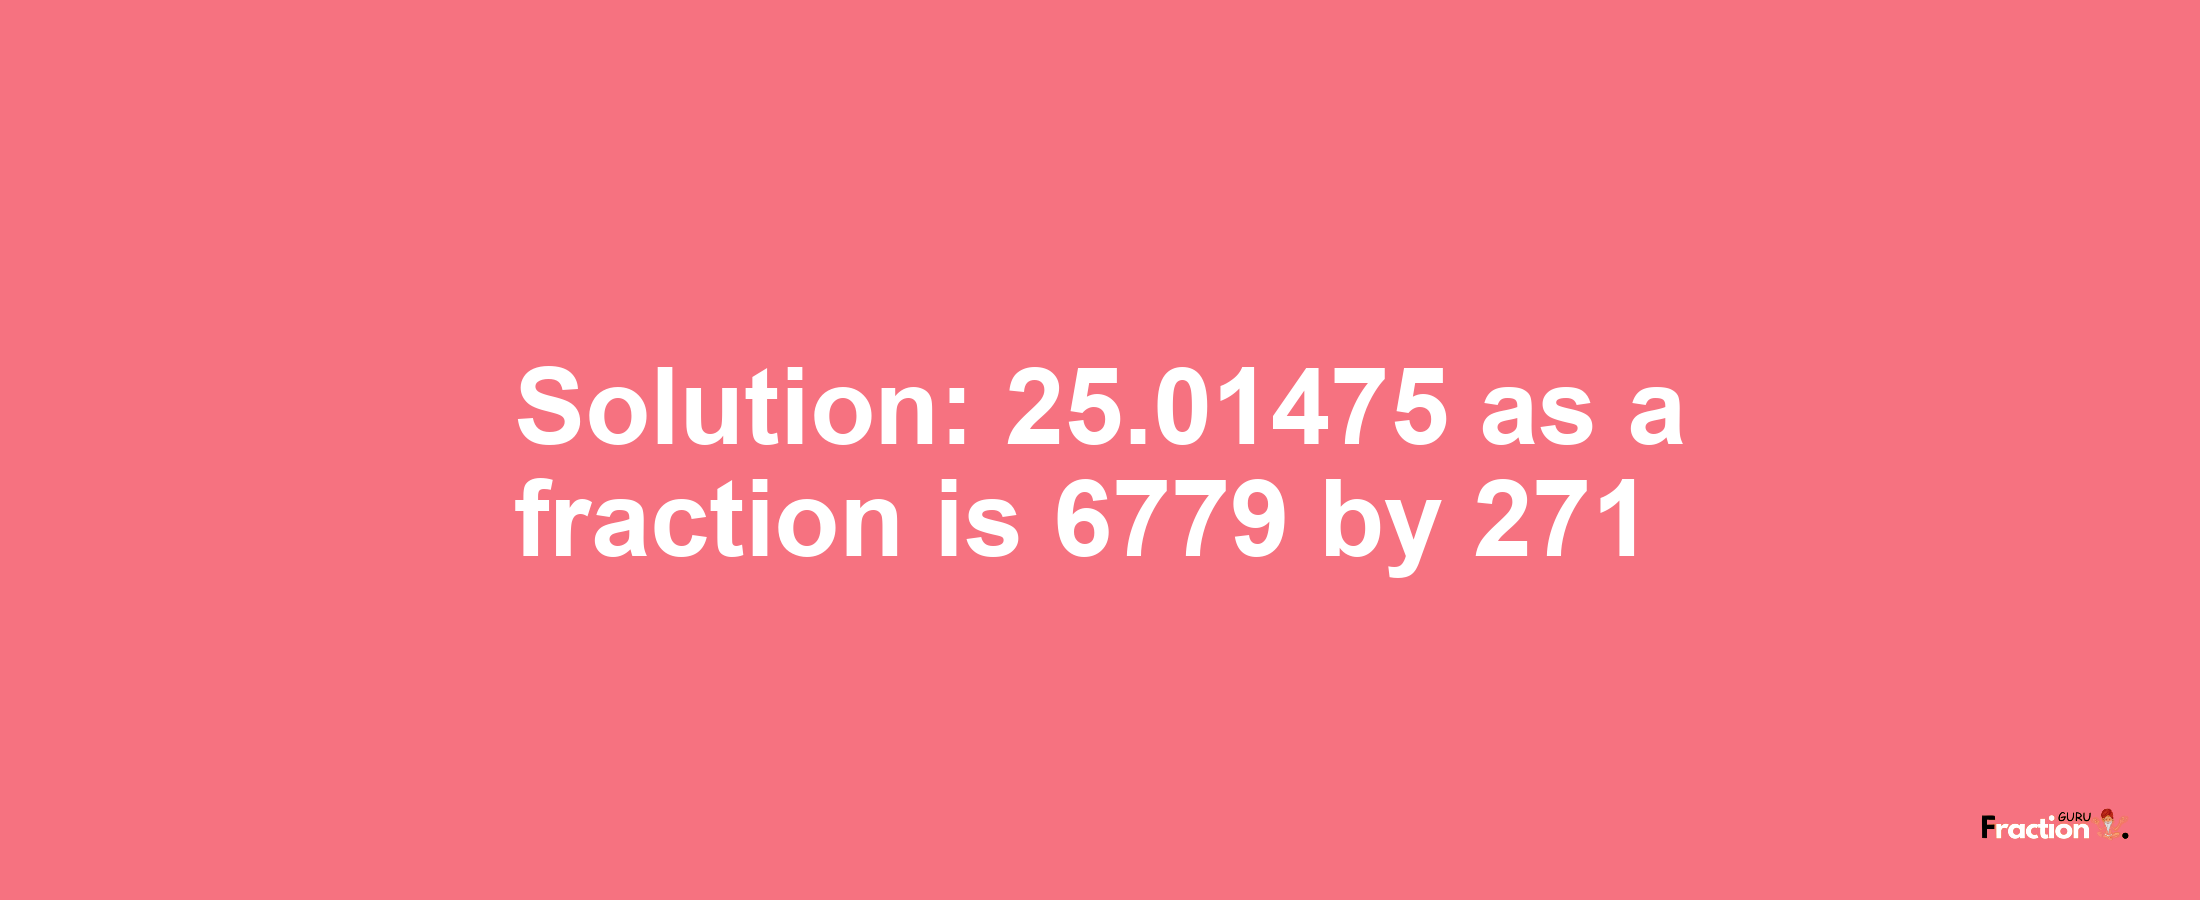 Solution:25.01475 as a fraction is 6779/271